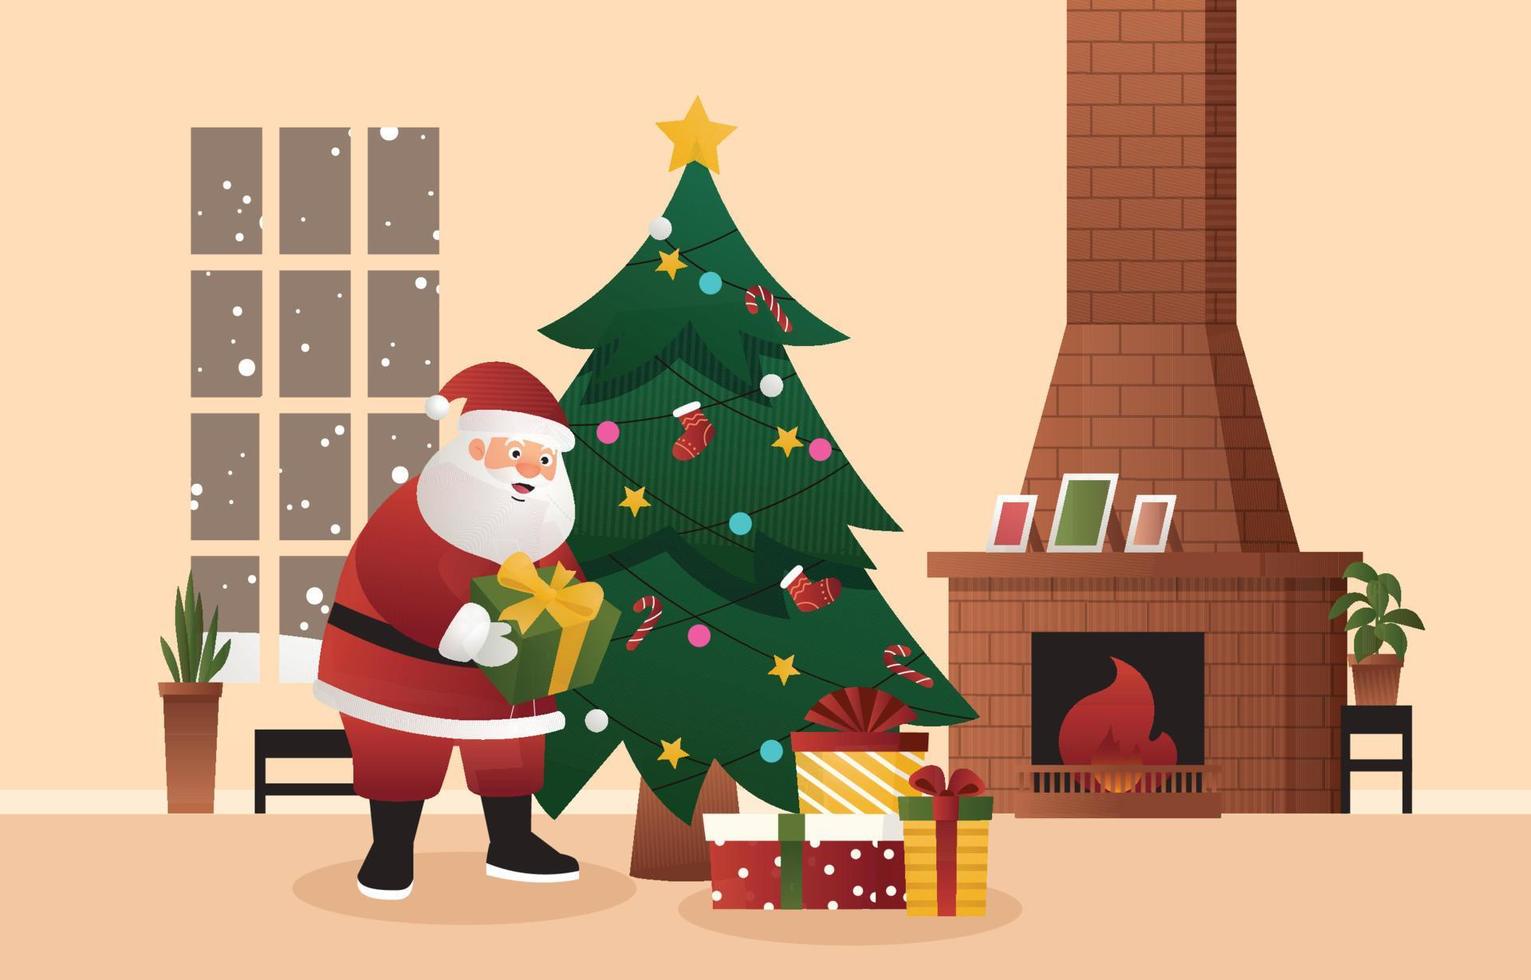 Santa Claus Leaving a Present Under the Christmas Tree vector